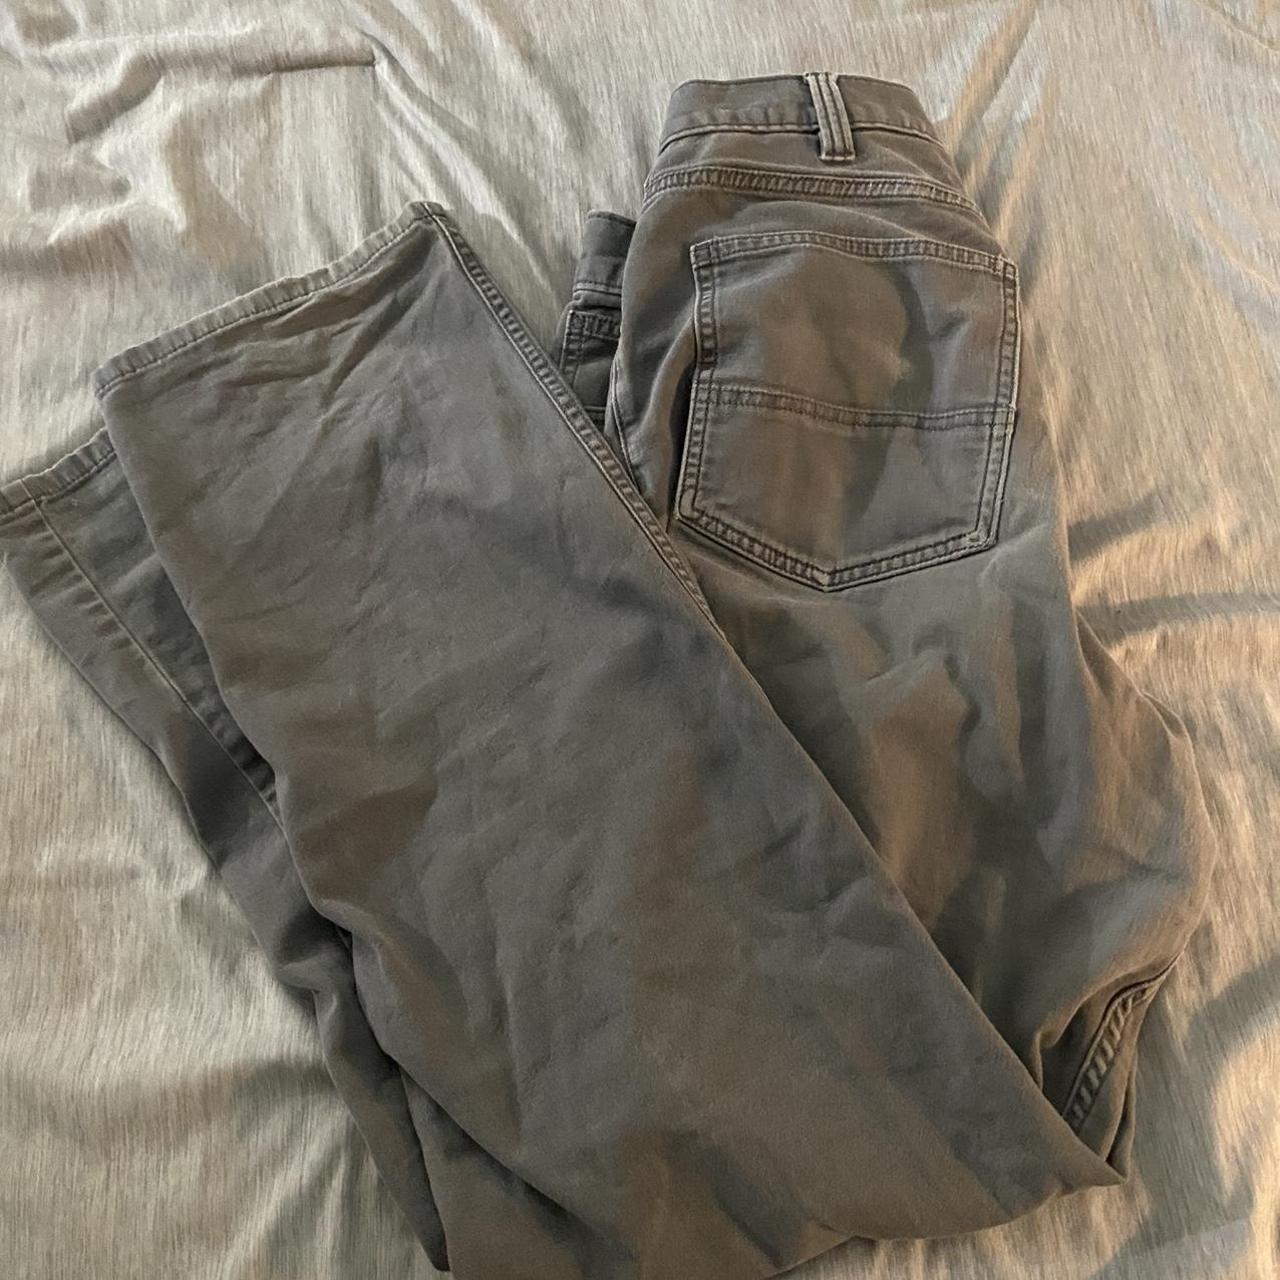 Grey Carhartt Pants 👖 Size 35/34 Cleaned and Washed... - Depop